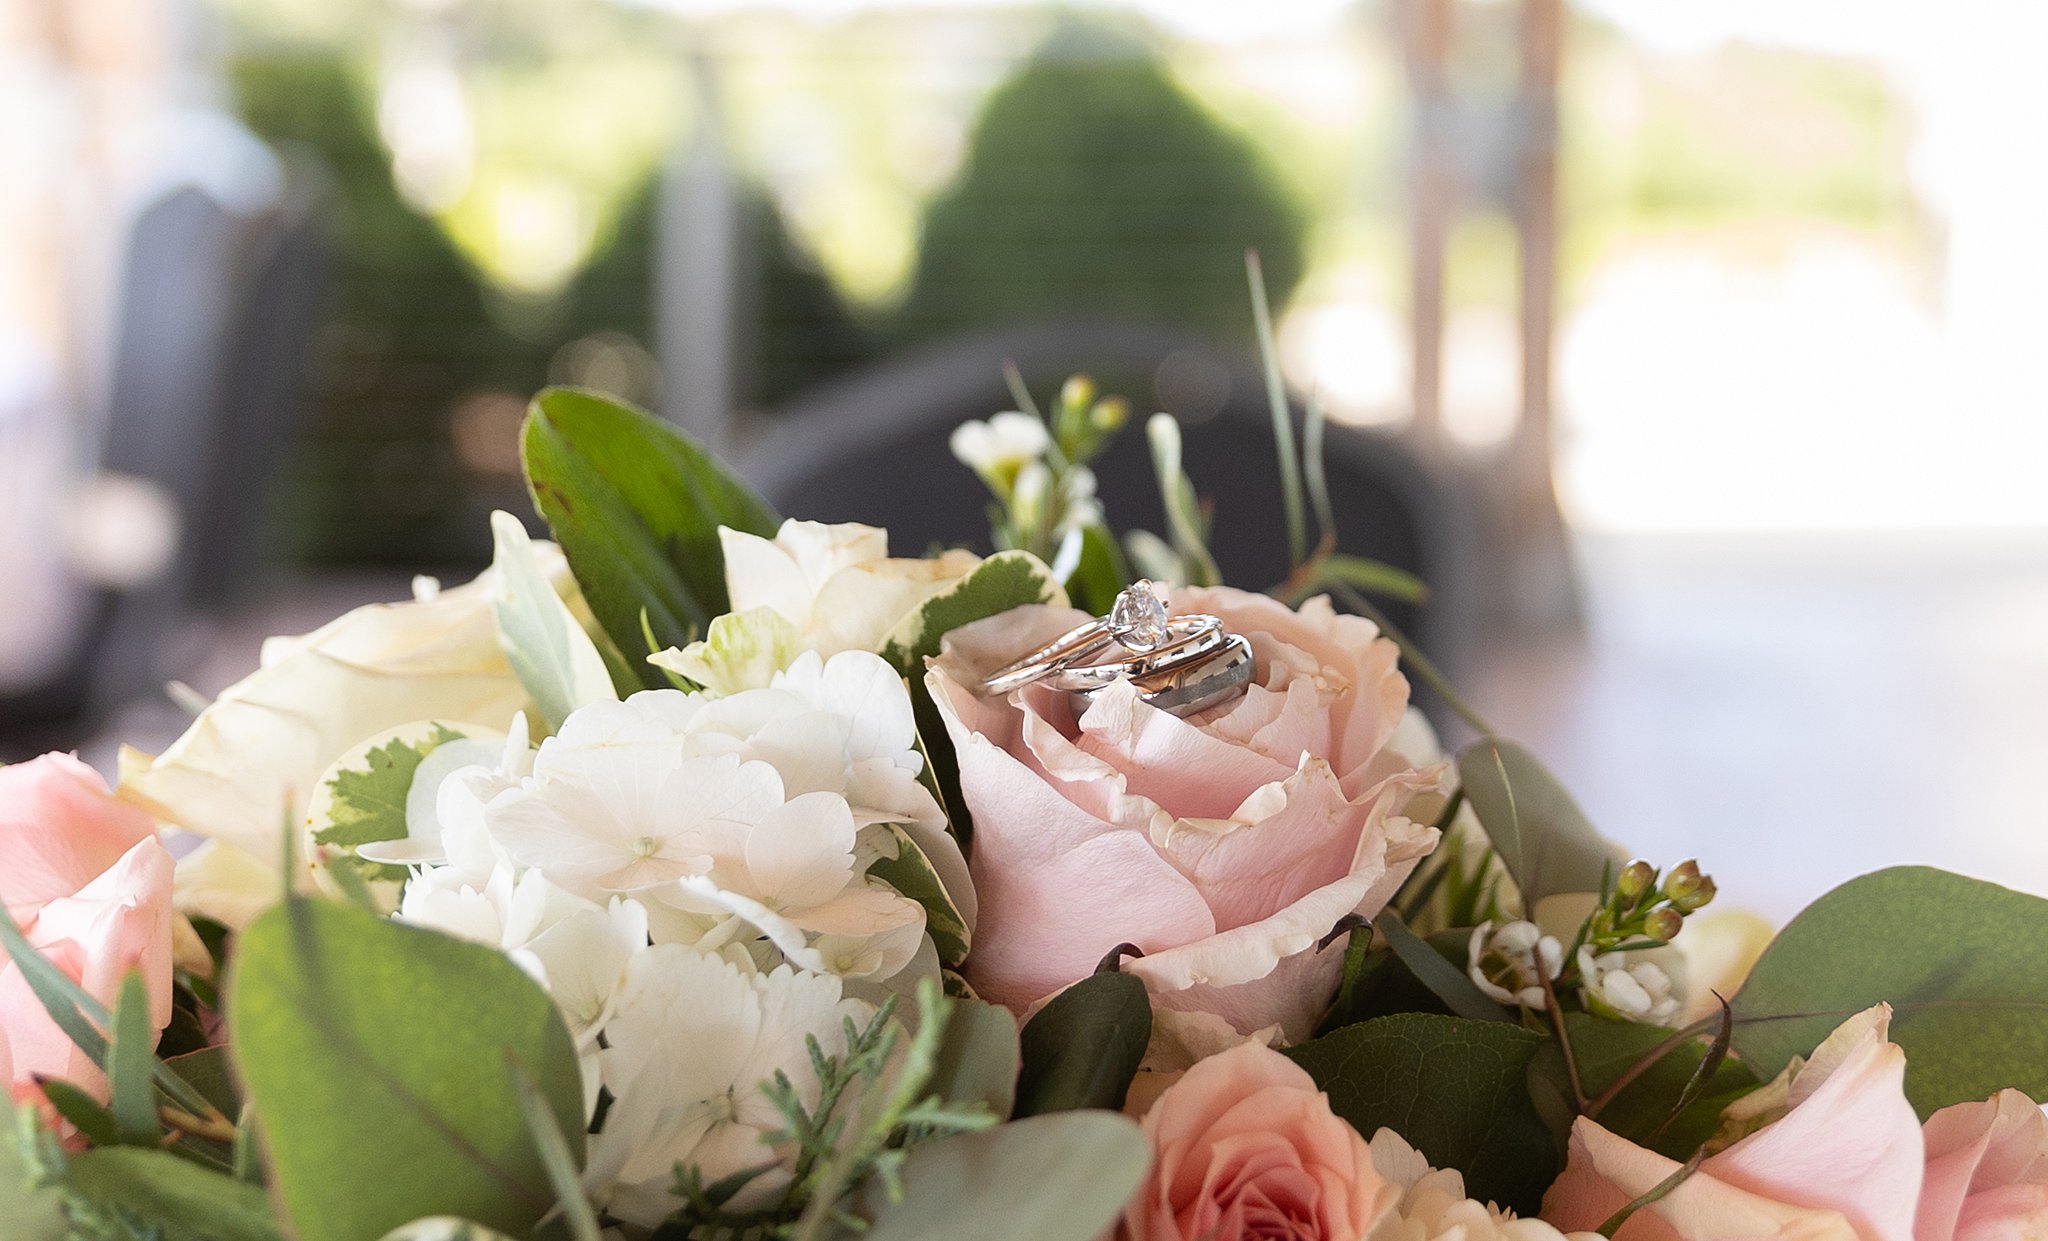 Wedding rings sit on a pink rose of a large bouquet of flowers